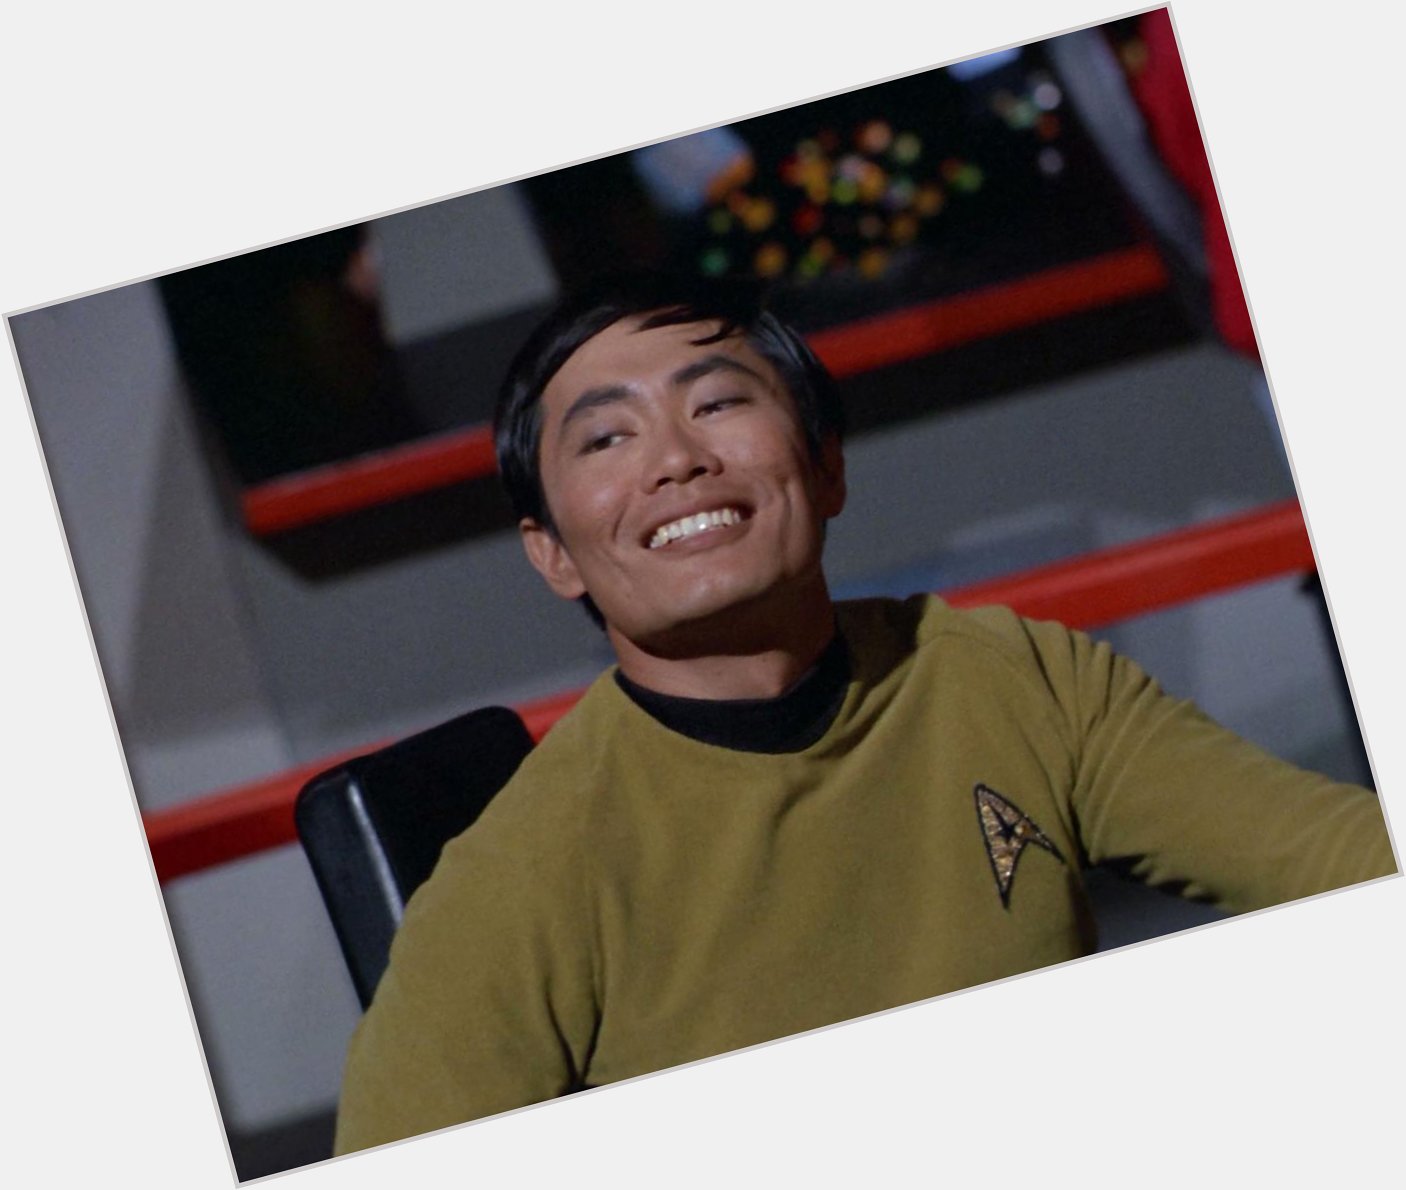 Haha we all know what day it is. Happy birthday 2 George Takei 